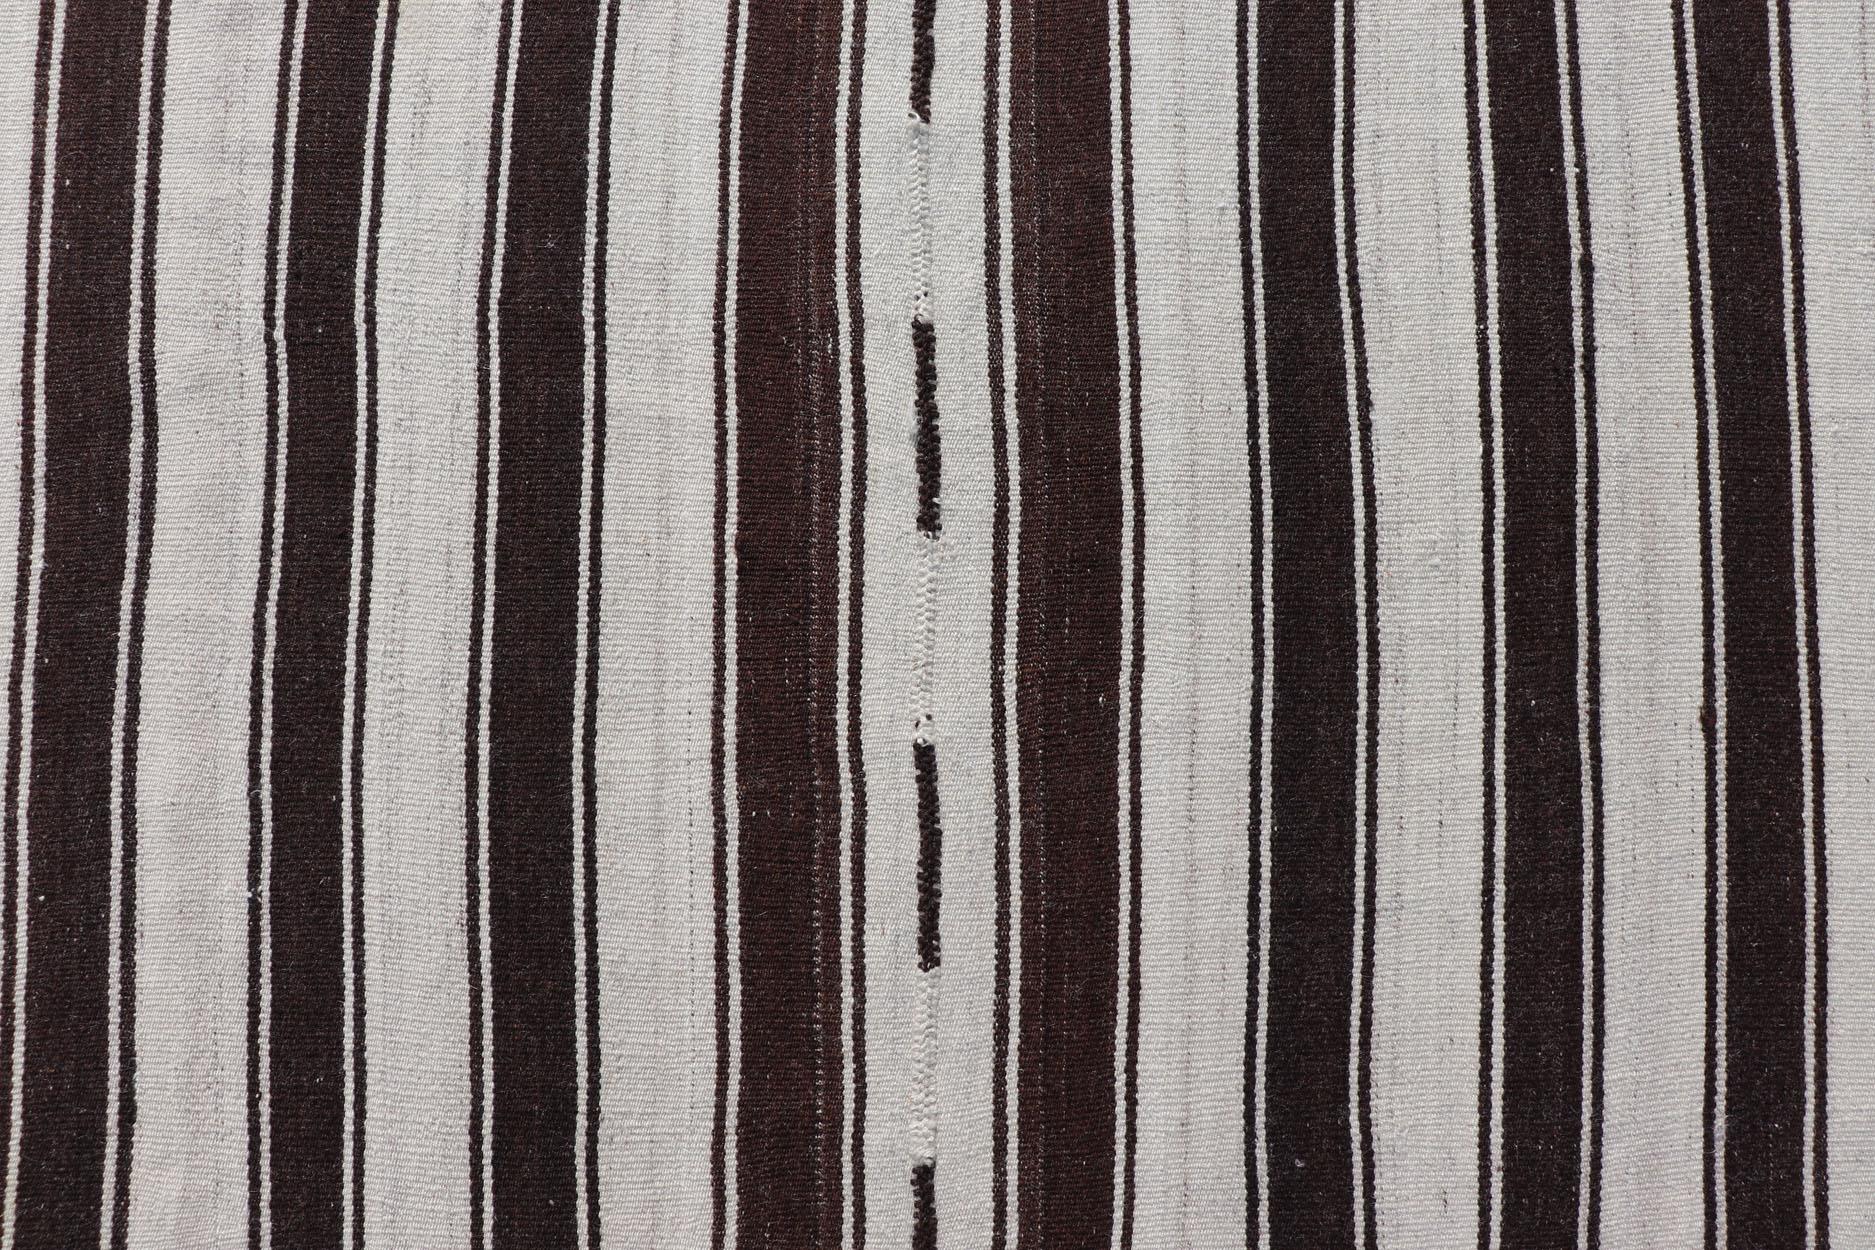 Vintage Turkish Kilim Rug with Vertical Stripes in Chocolate Brown and Cream For Sale 4